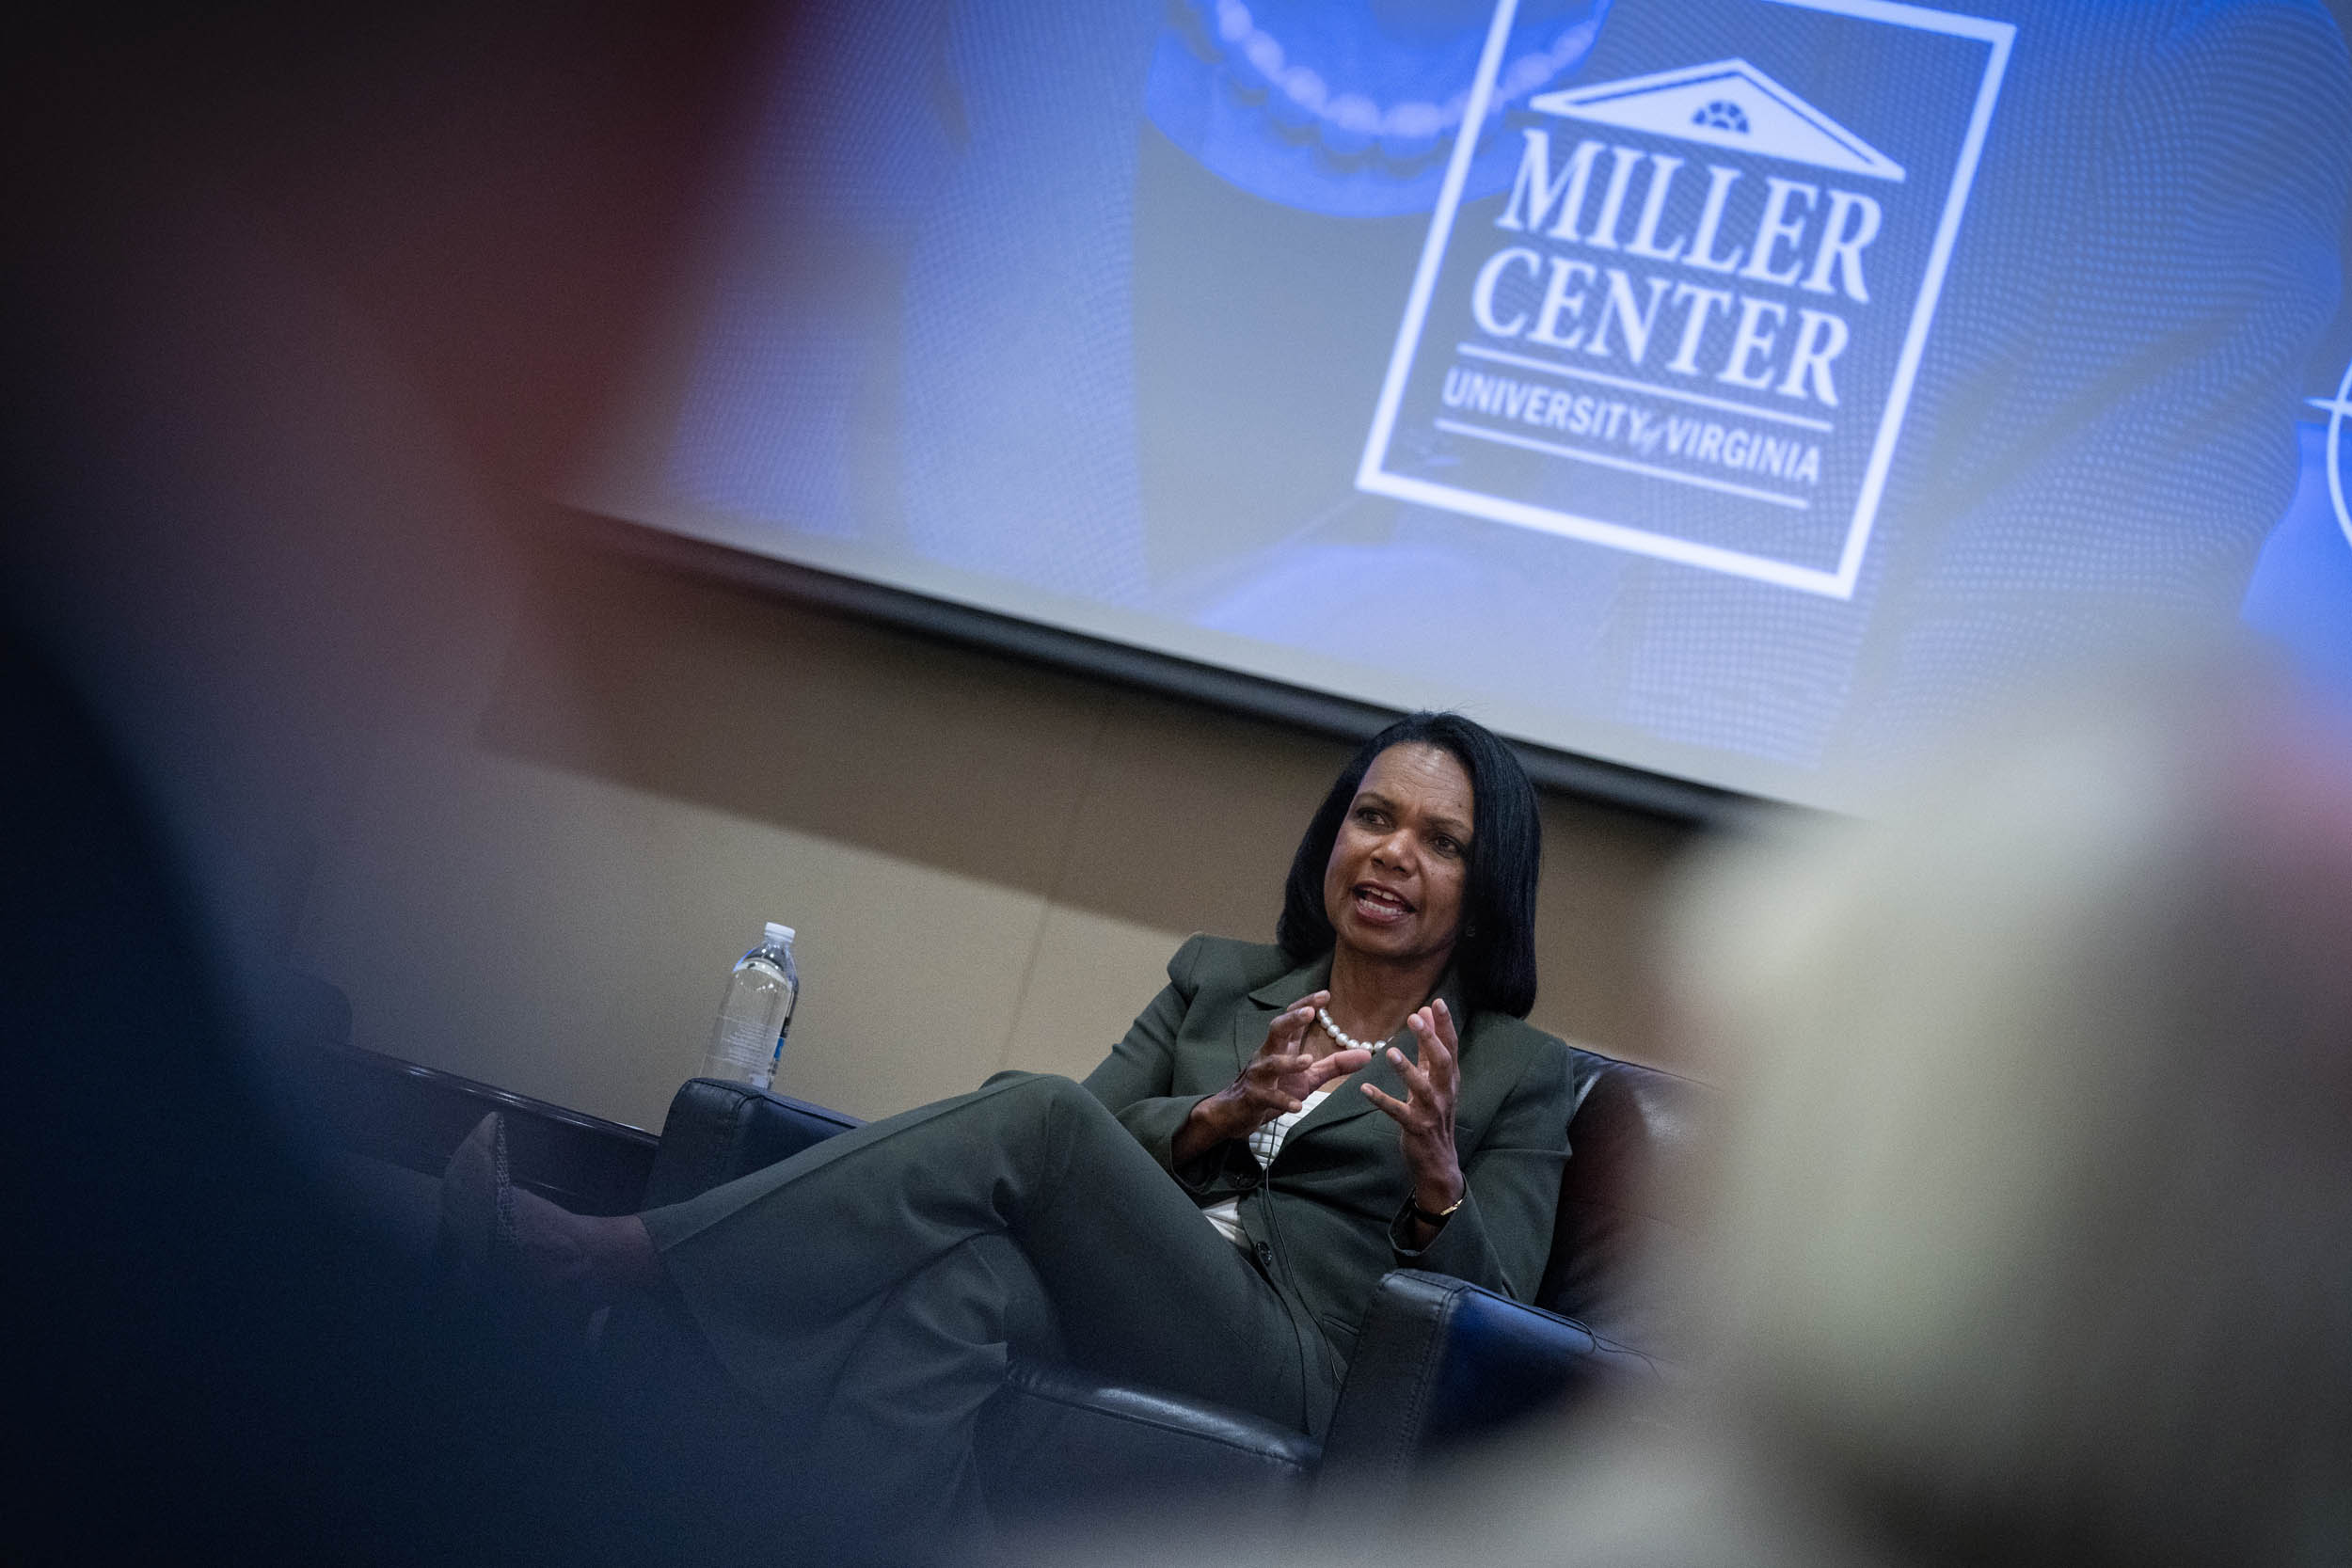 Condoleezza Rice speaking from the stage to a crowd